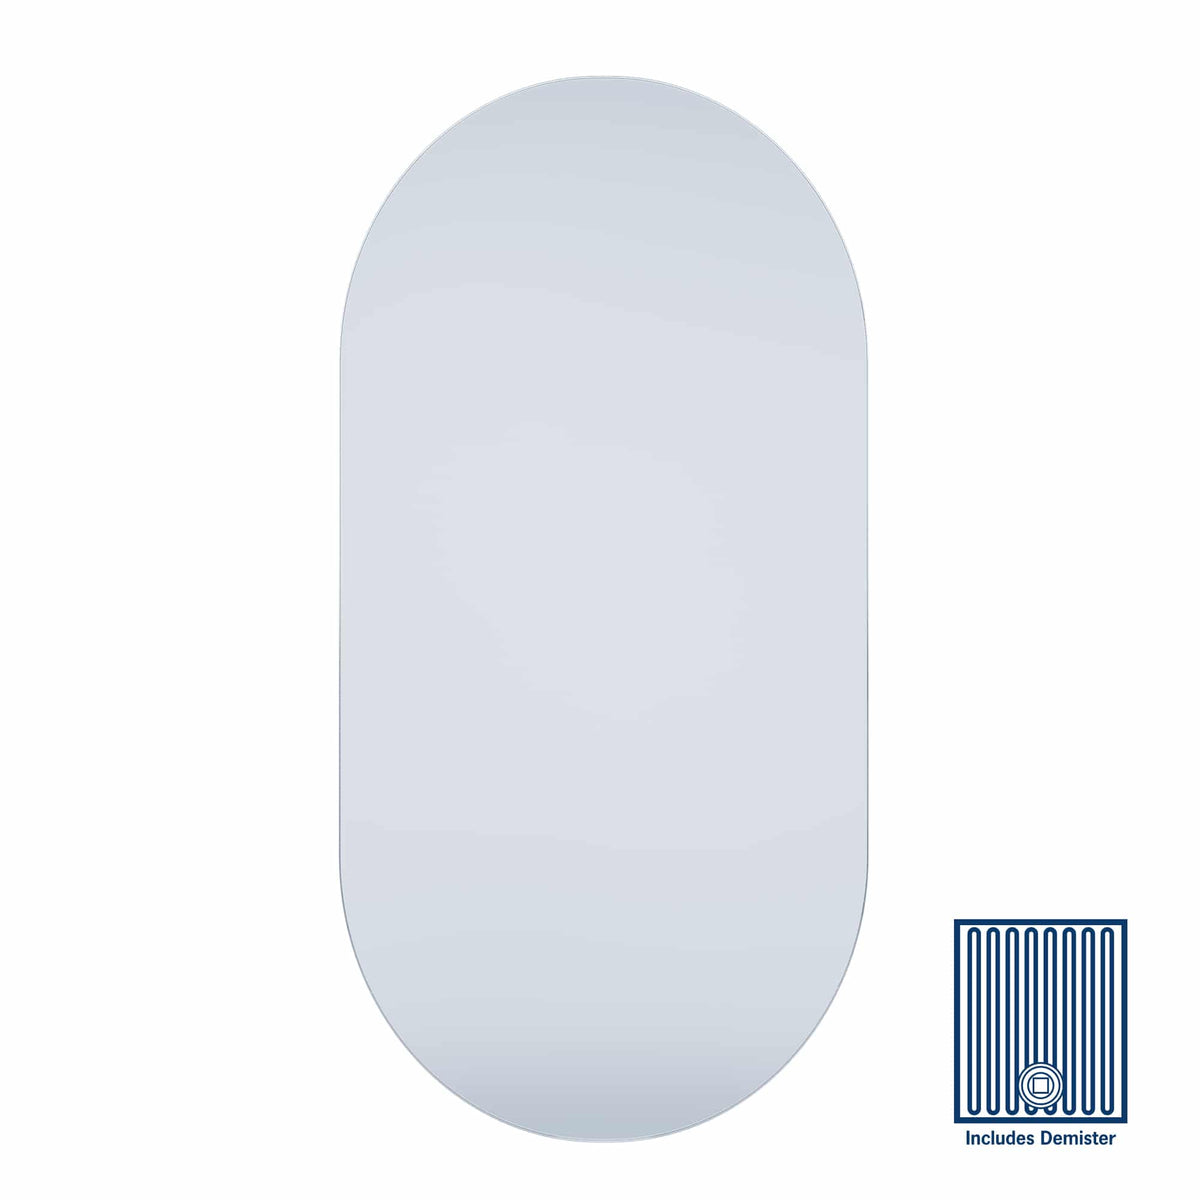 DP5010HND or DP5010GTD Pill Shape Polished Edge Mirror with Hangers or Glue to wall including demister